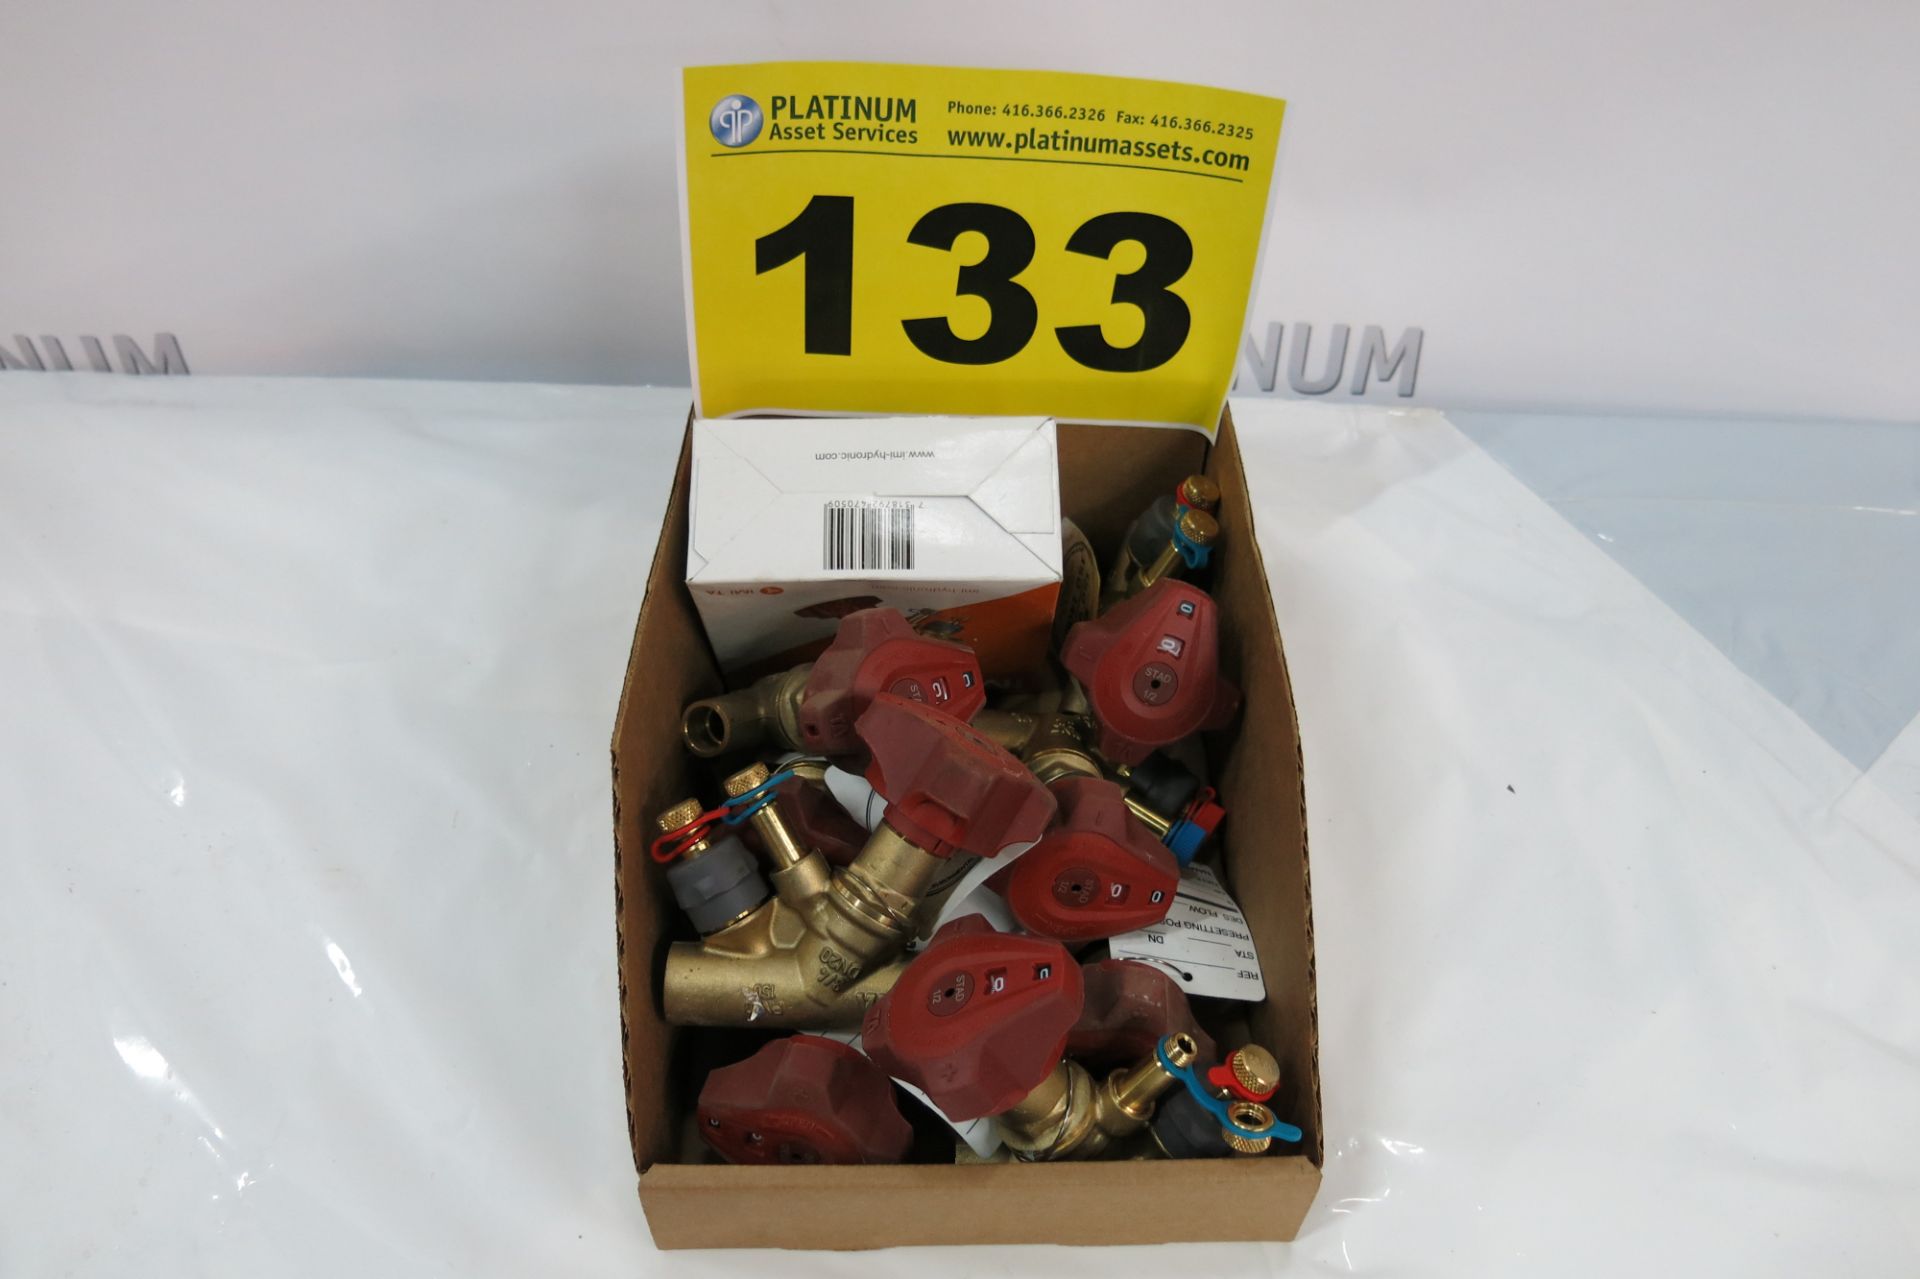 LOT OF VICTAULIC, 786, 1/2", BALANCING VALVE - NEW (LOCATED IN SCARBOROUGH)